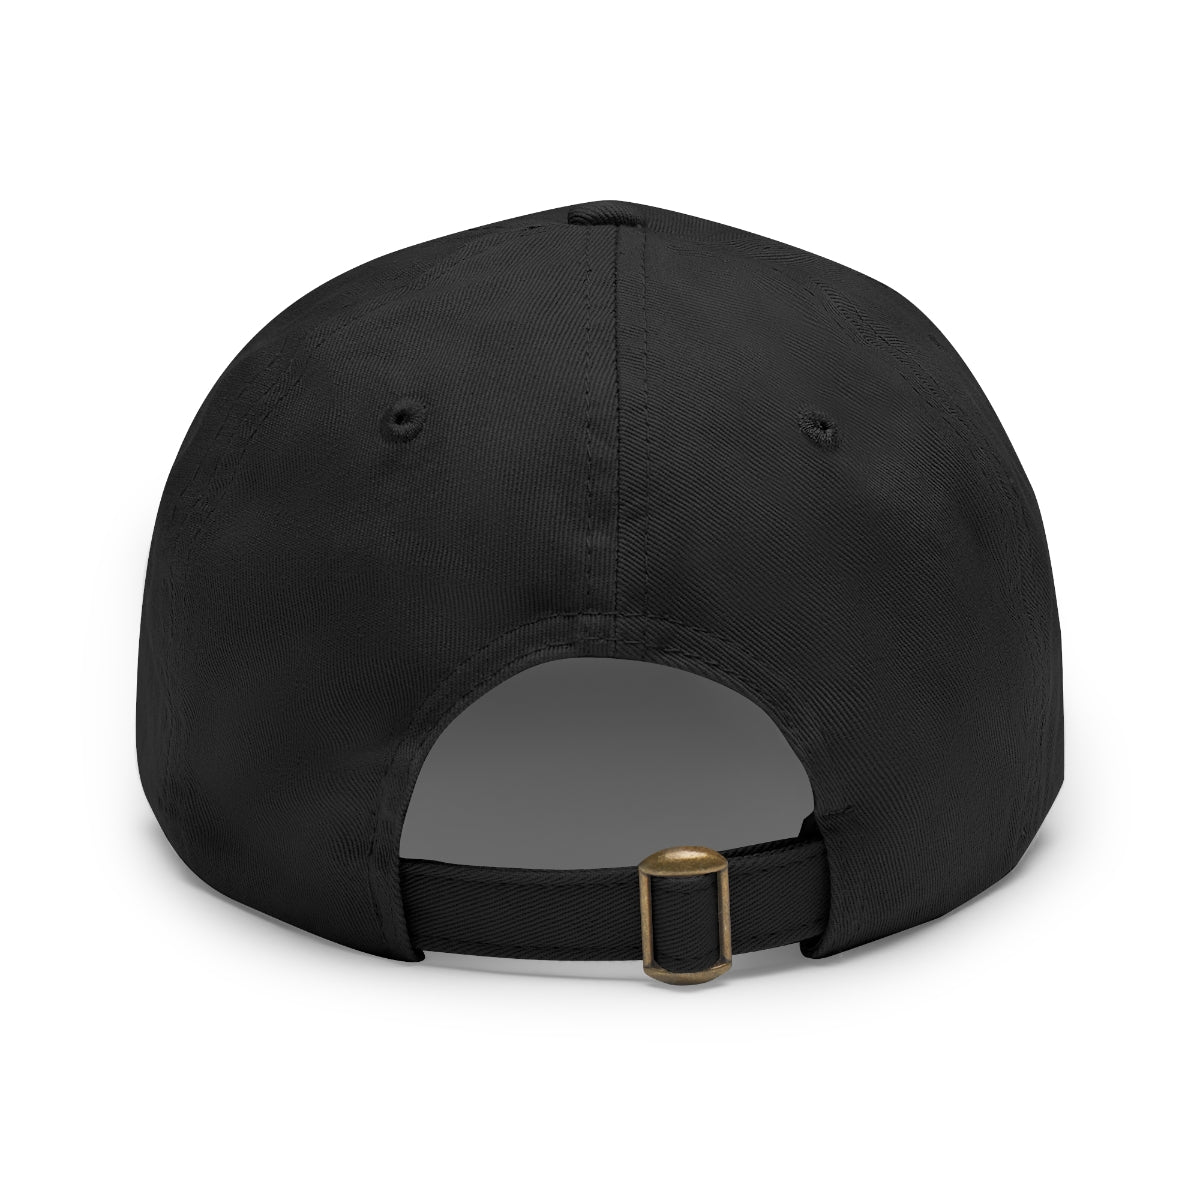 SBU 11 v1 Hat with Leather Patch (Gold)